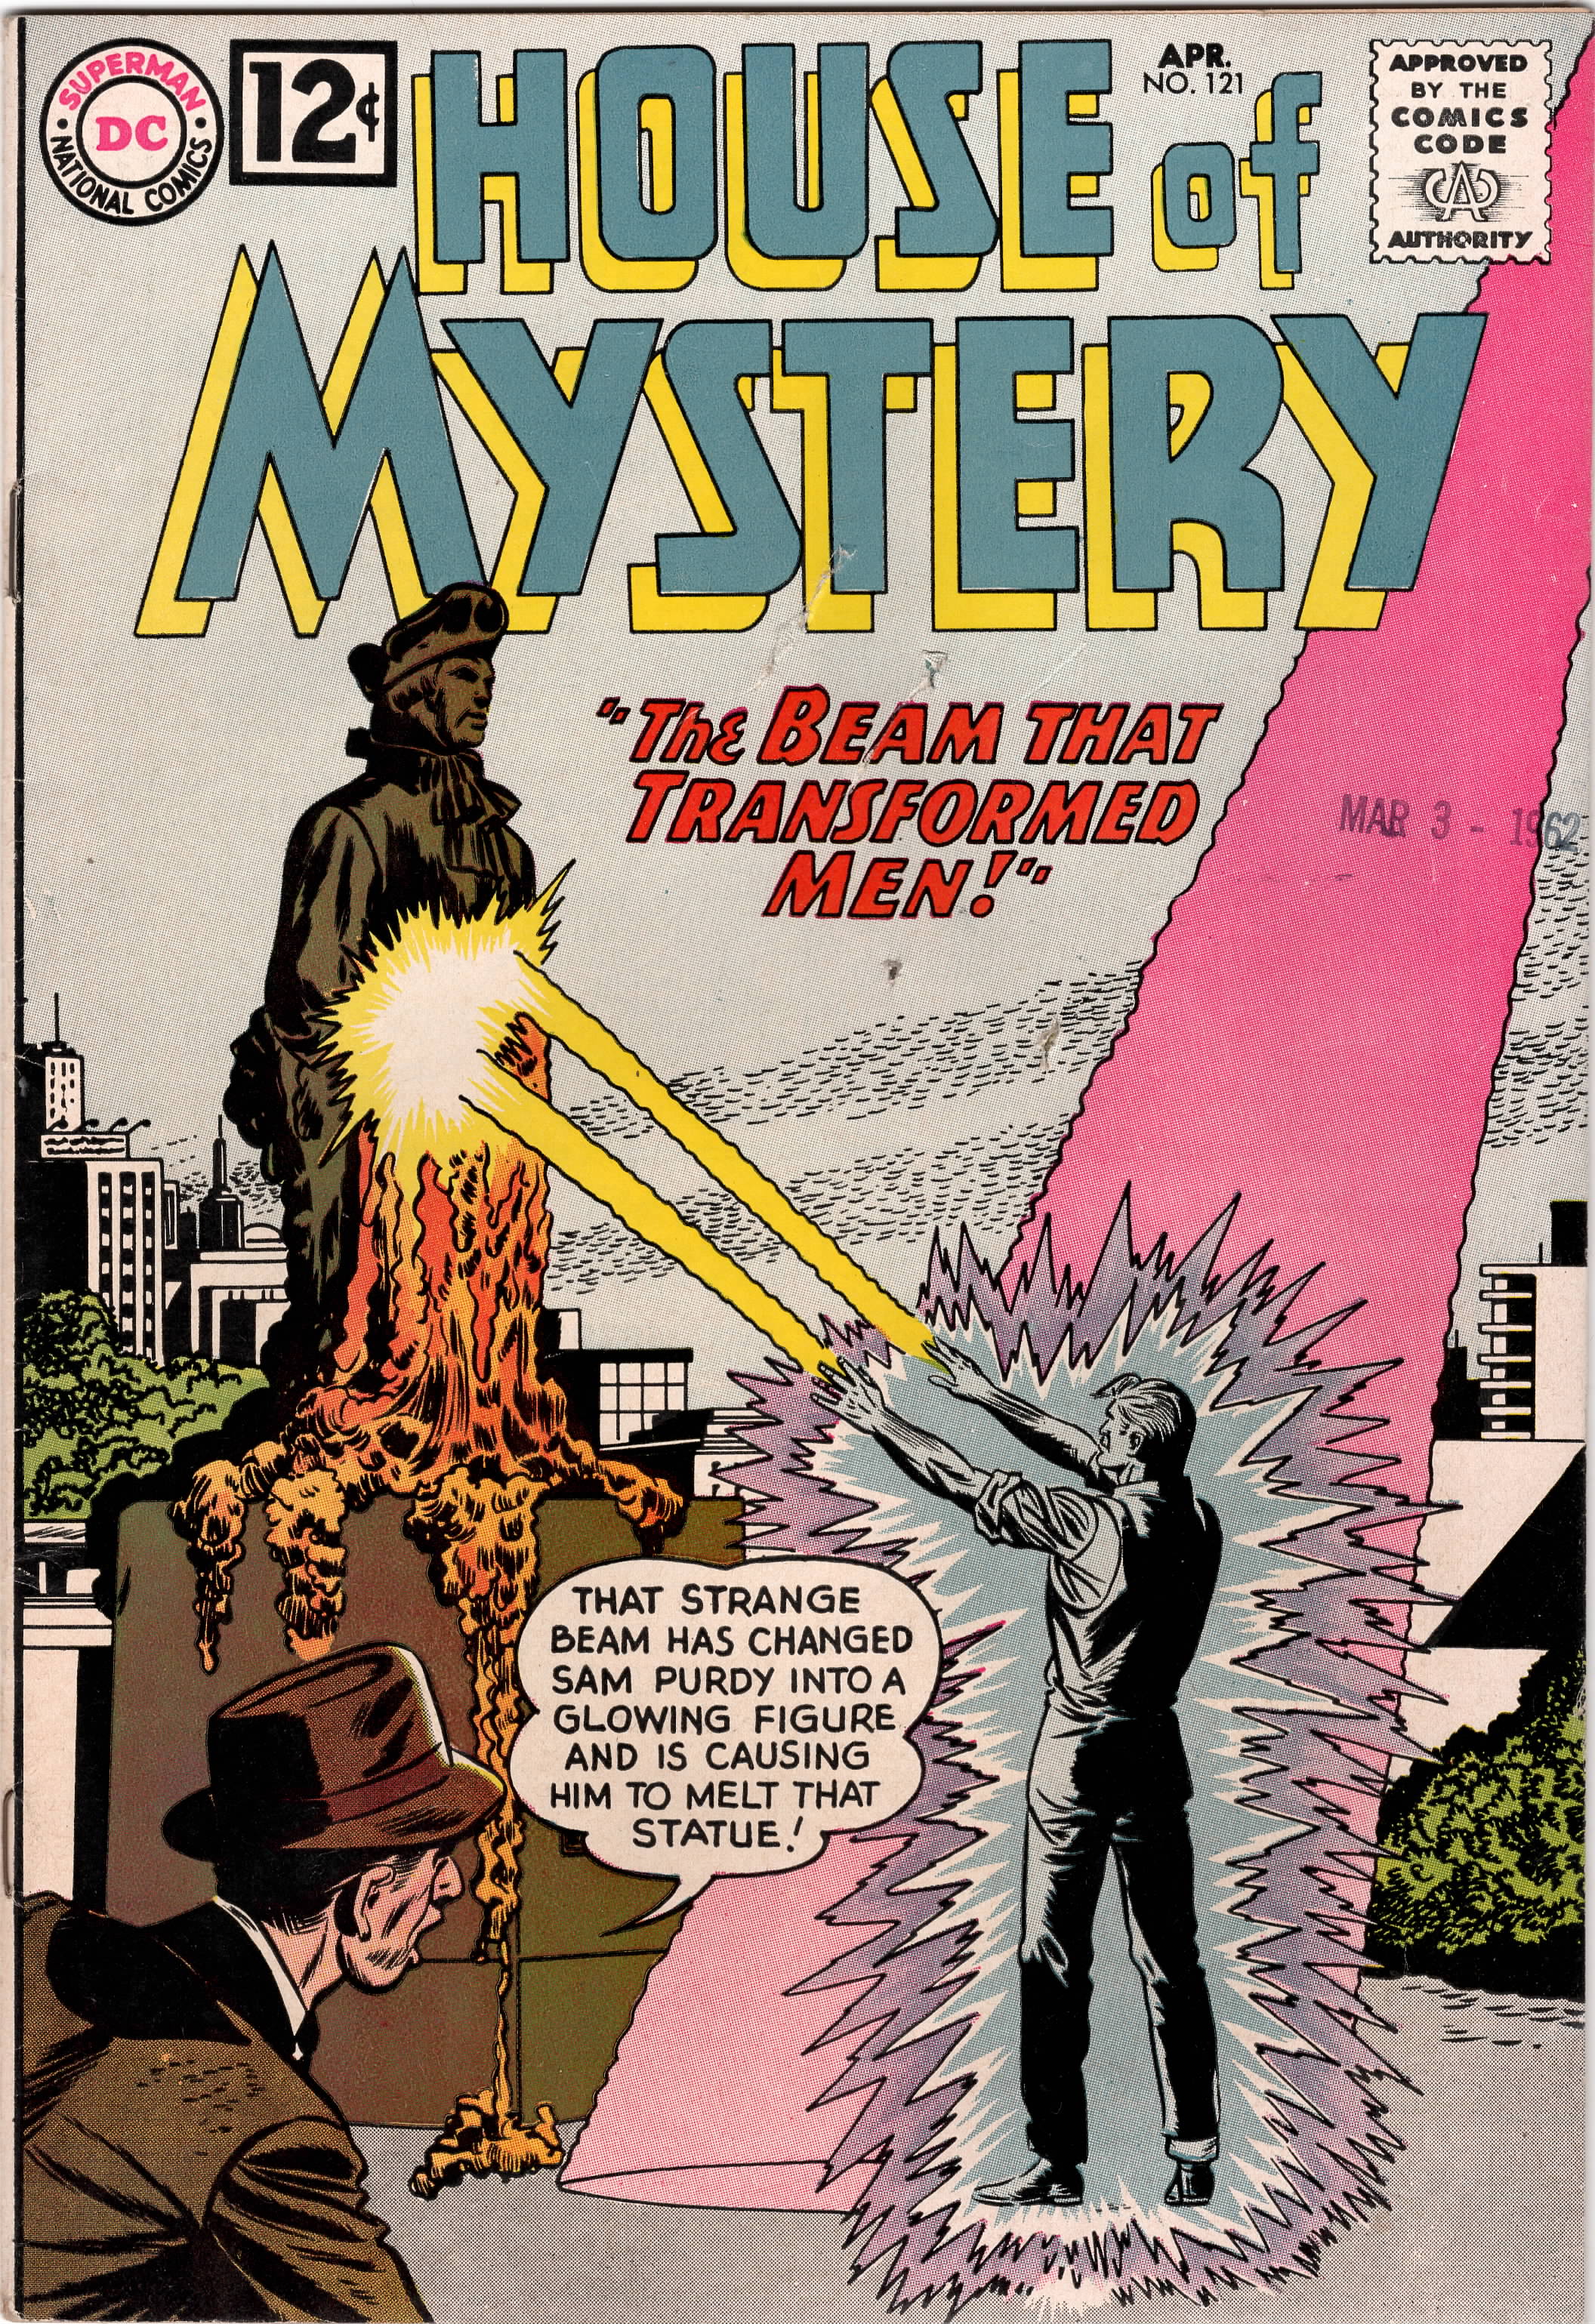 House of Mystery #121